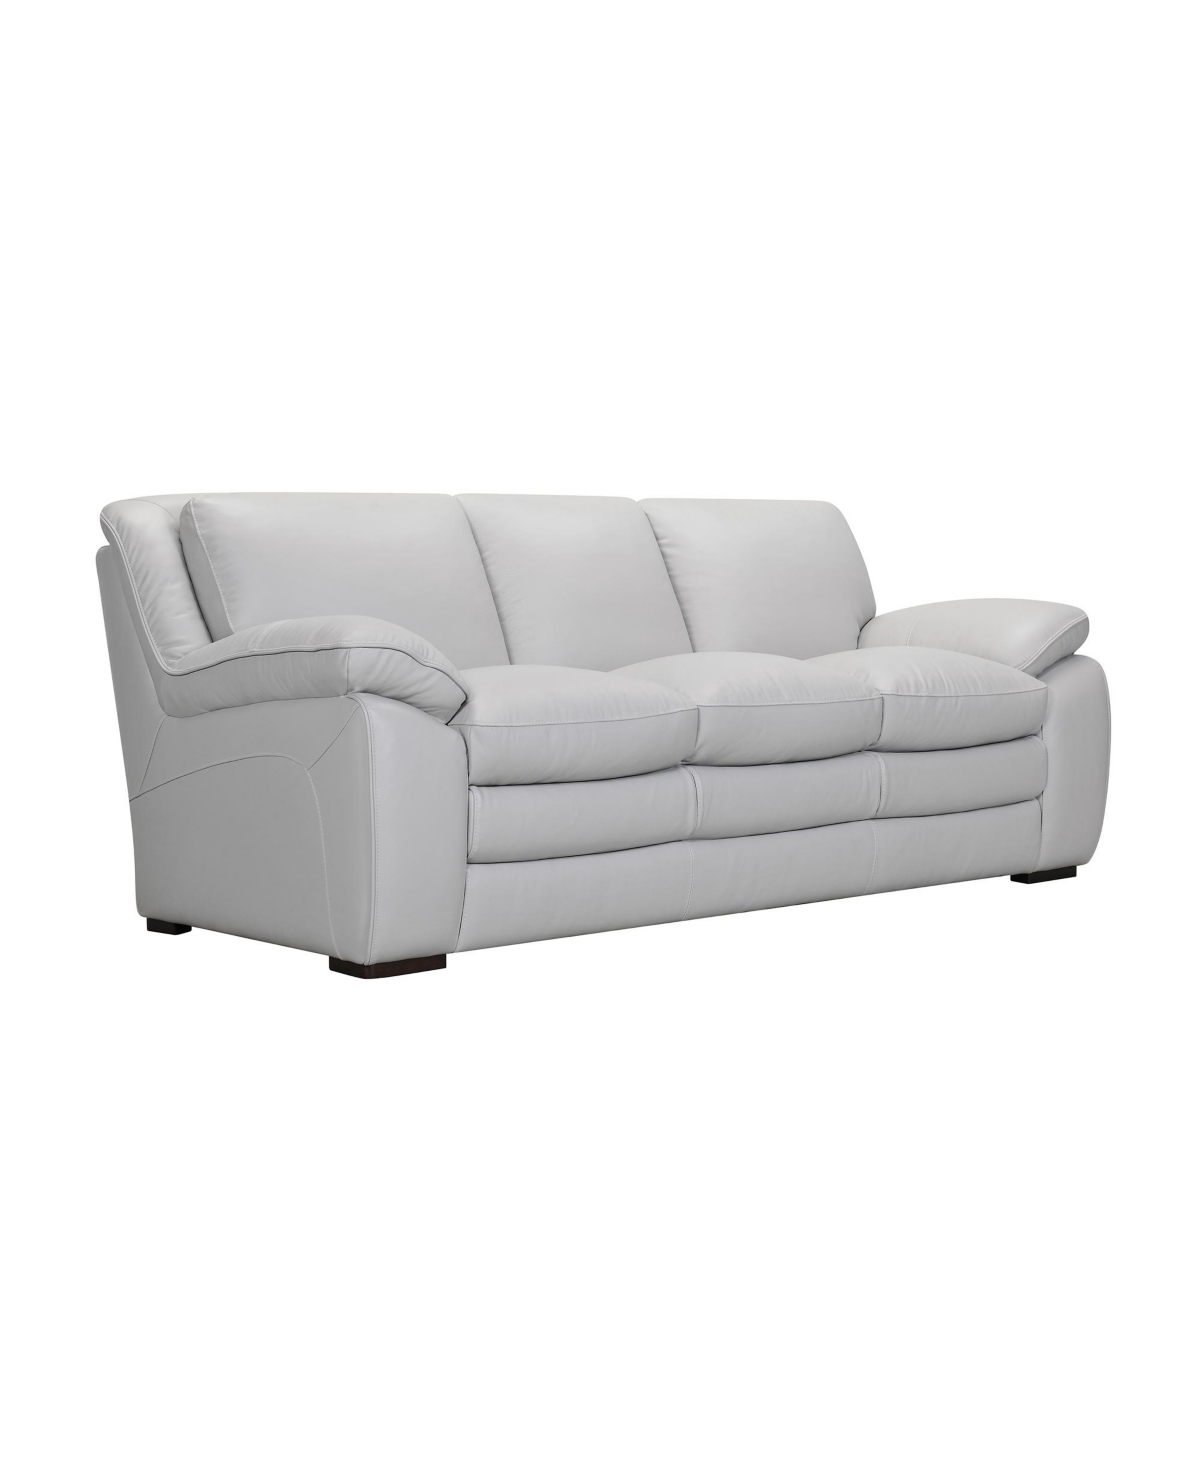 Shop Armen Living Zanna 92" Genuine Leather With Wood Legs In Contemporary Sofa In Dove Gray